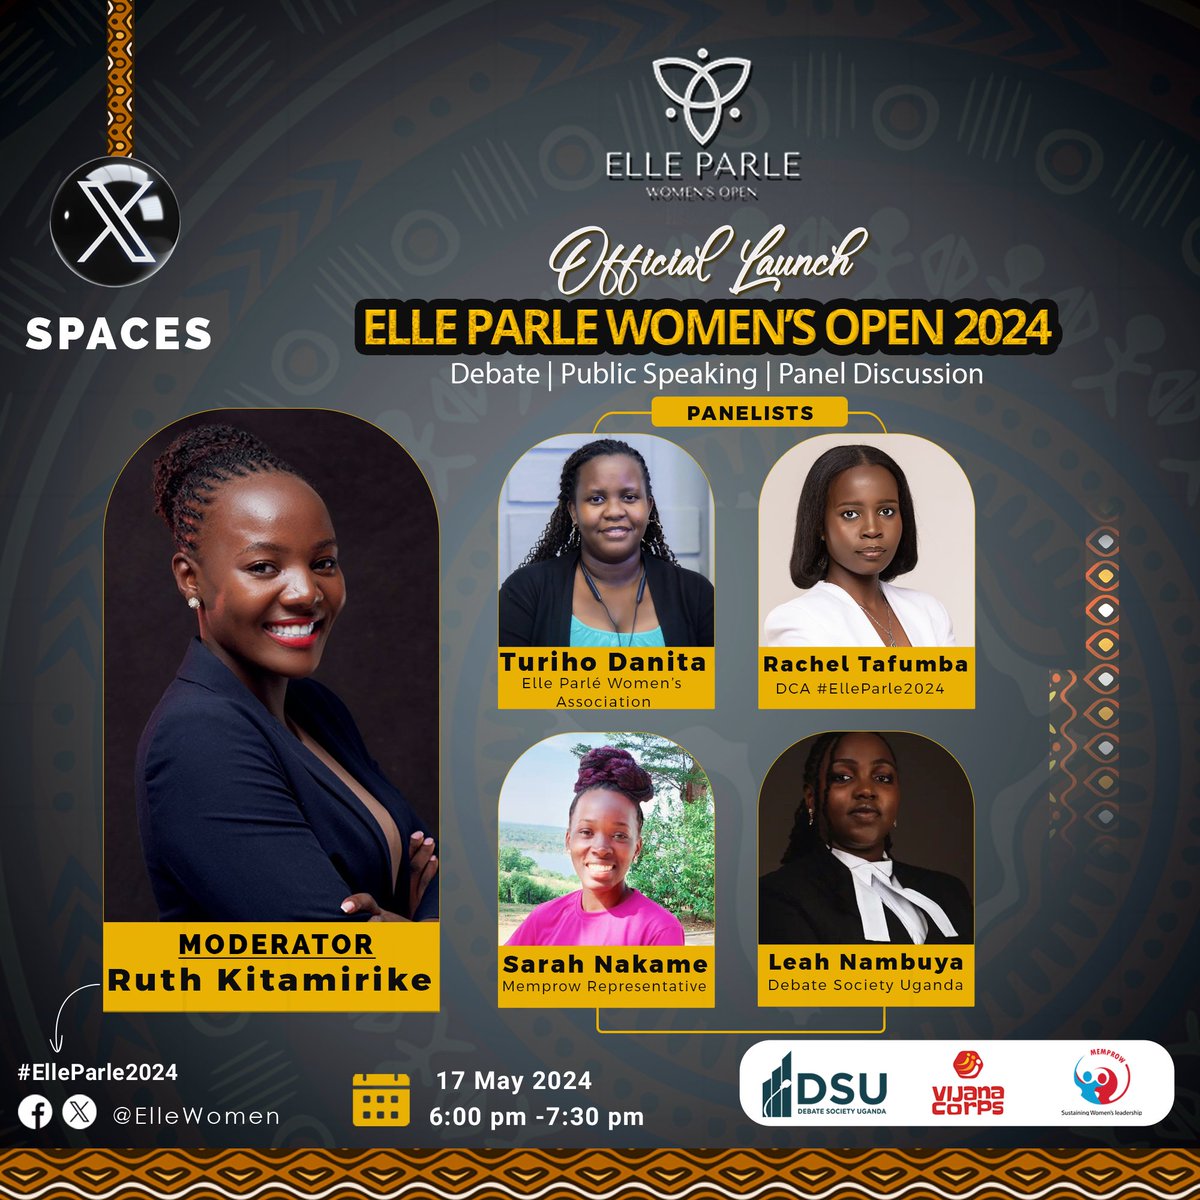 Excited to announce our amazing panelists who will be speaking the Virtual Launch of the Elle Parle Women's Open 2024 - #ElleParle2024 on X Spaces Moderator: @KitamirikeRuth Panelists: @danitakturiho @RachelT91162 @nakame_sarah @LeahTabby #DebateIsTheThing #WomenEmpowerment